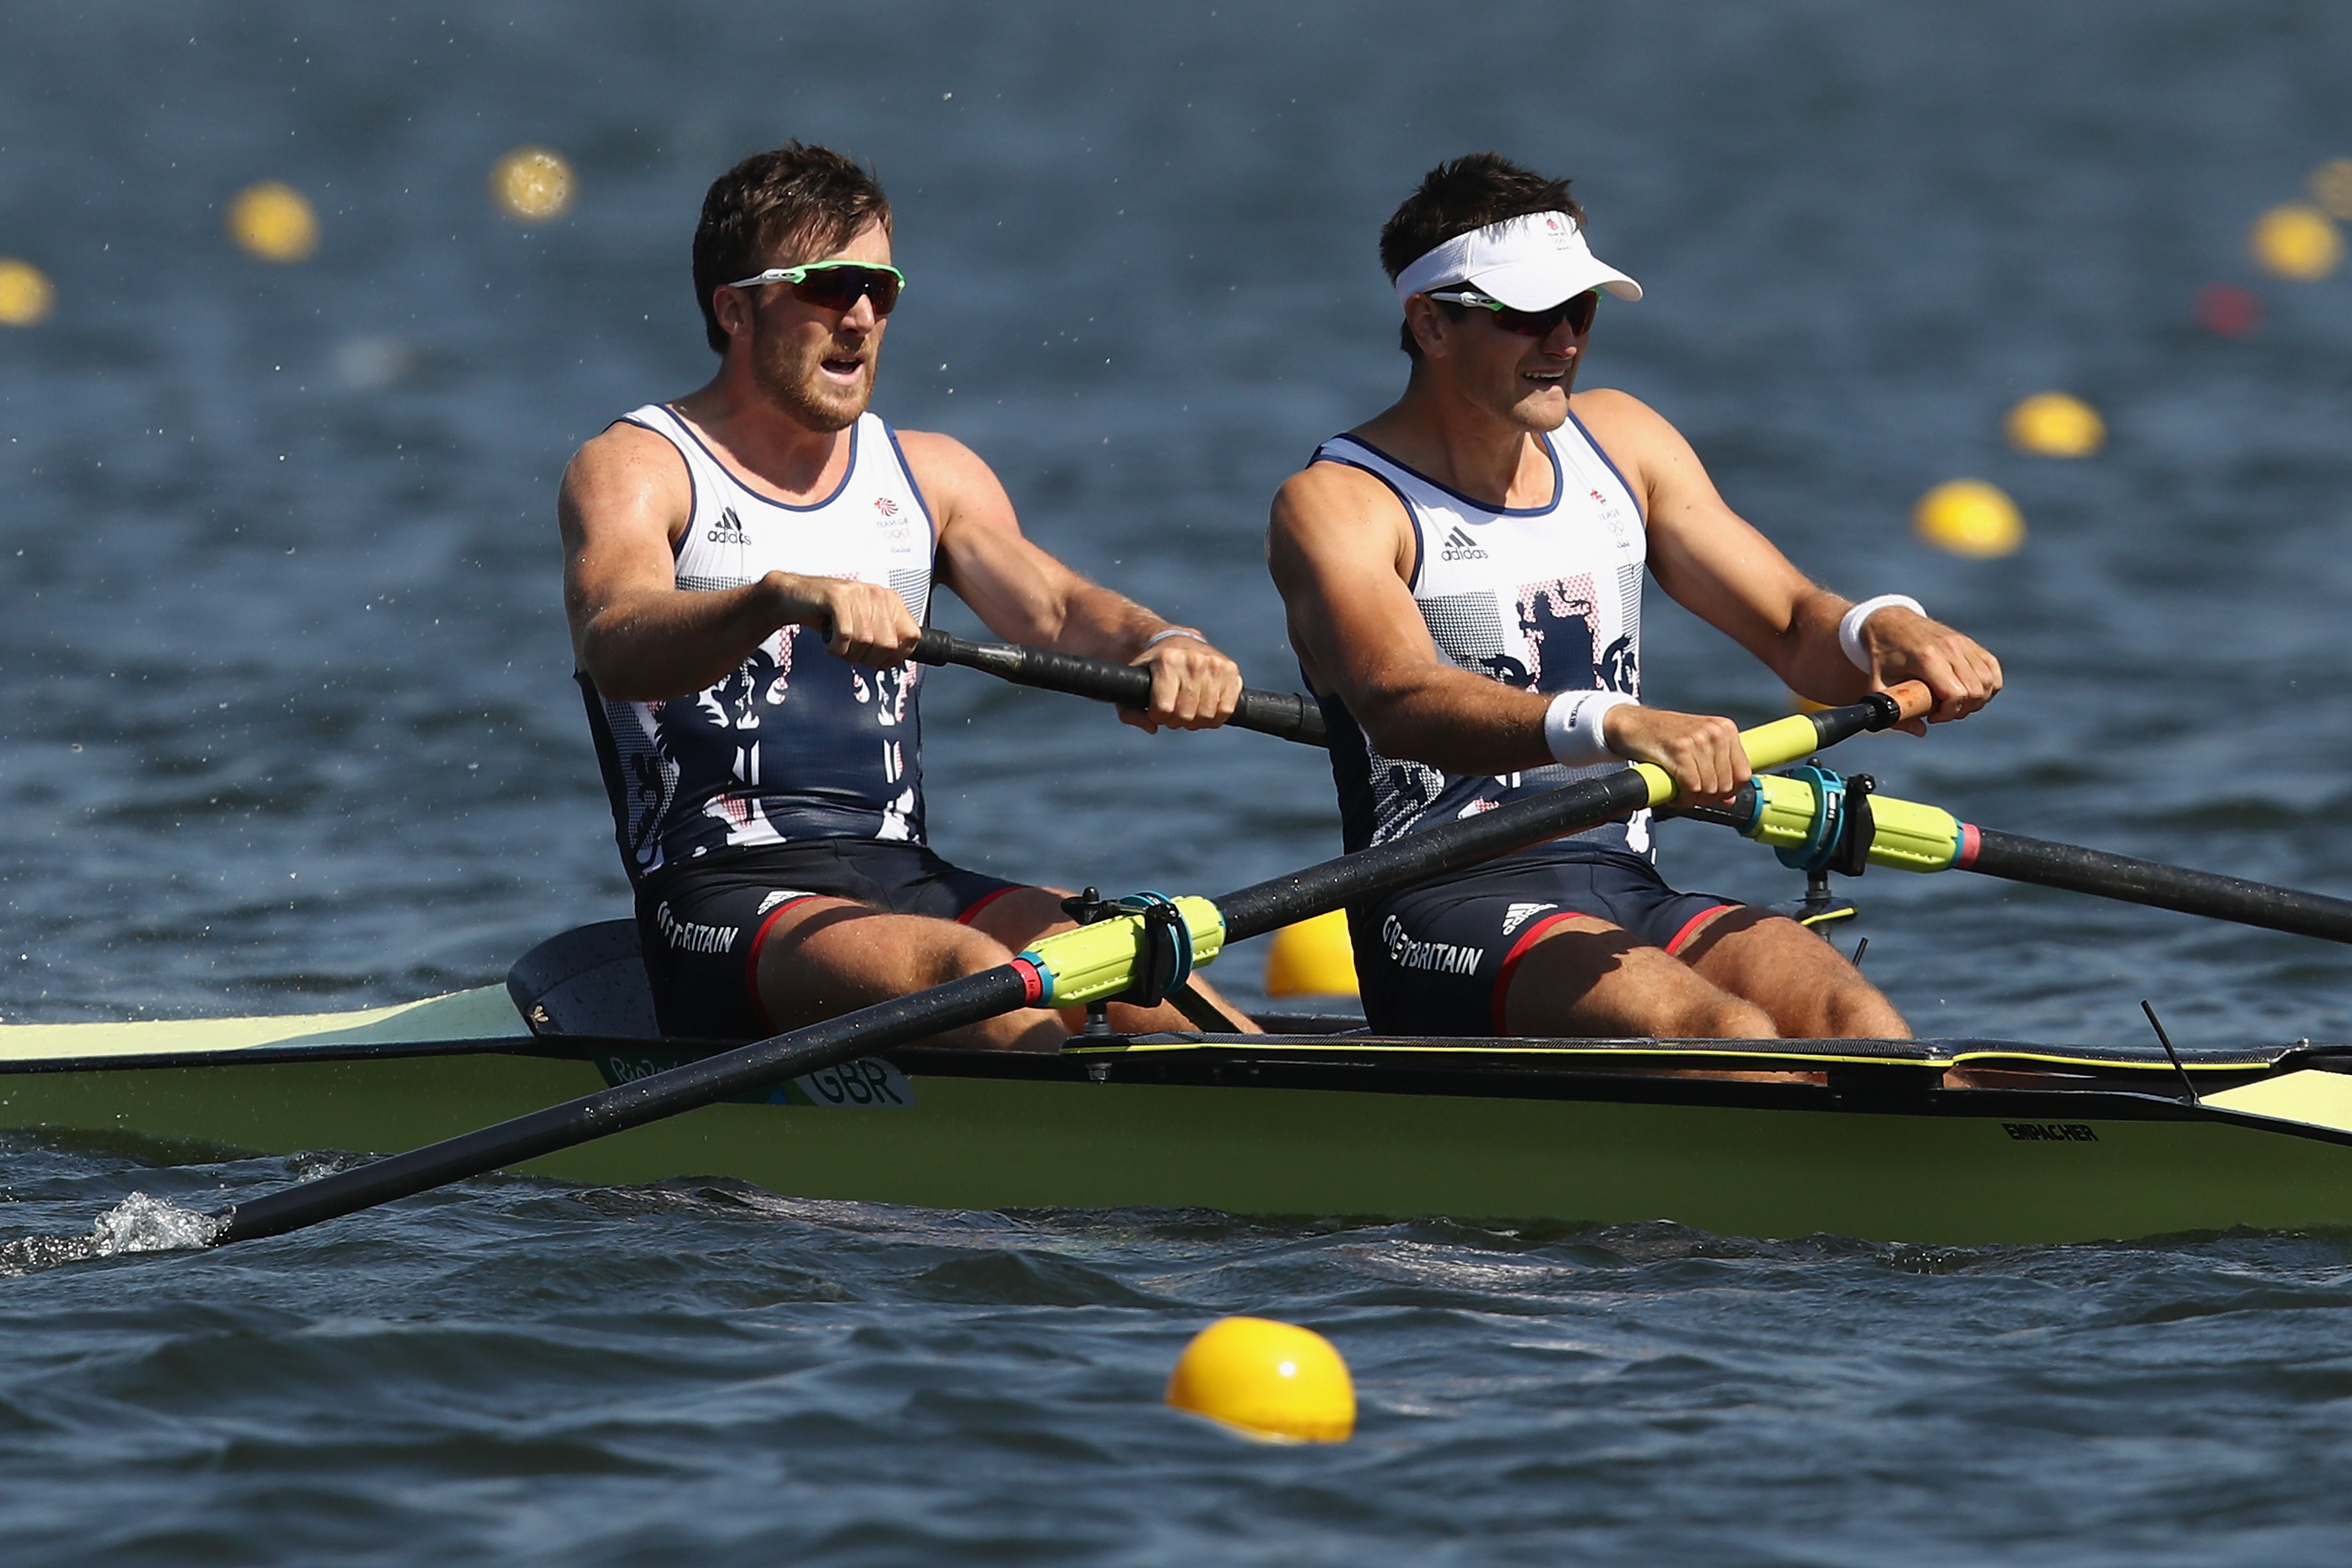 Alan Sinclair (left) is targeting a place at his second Olympic Games.